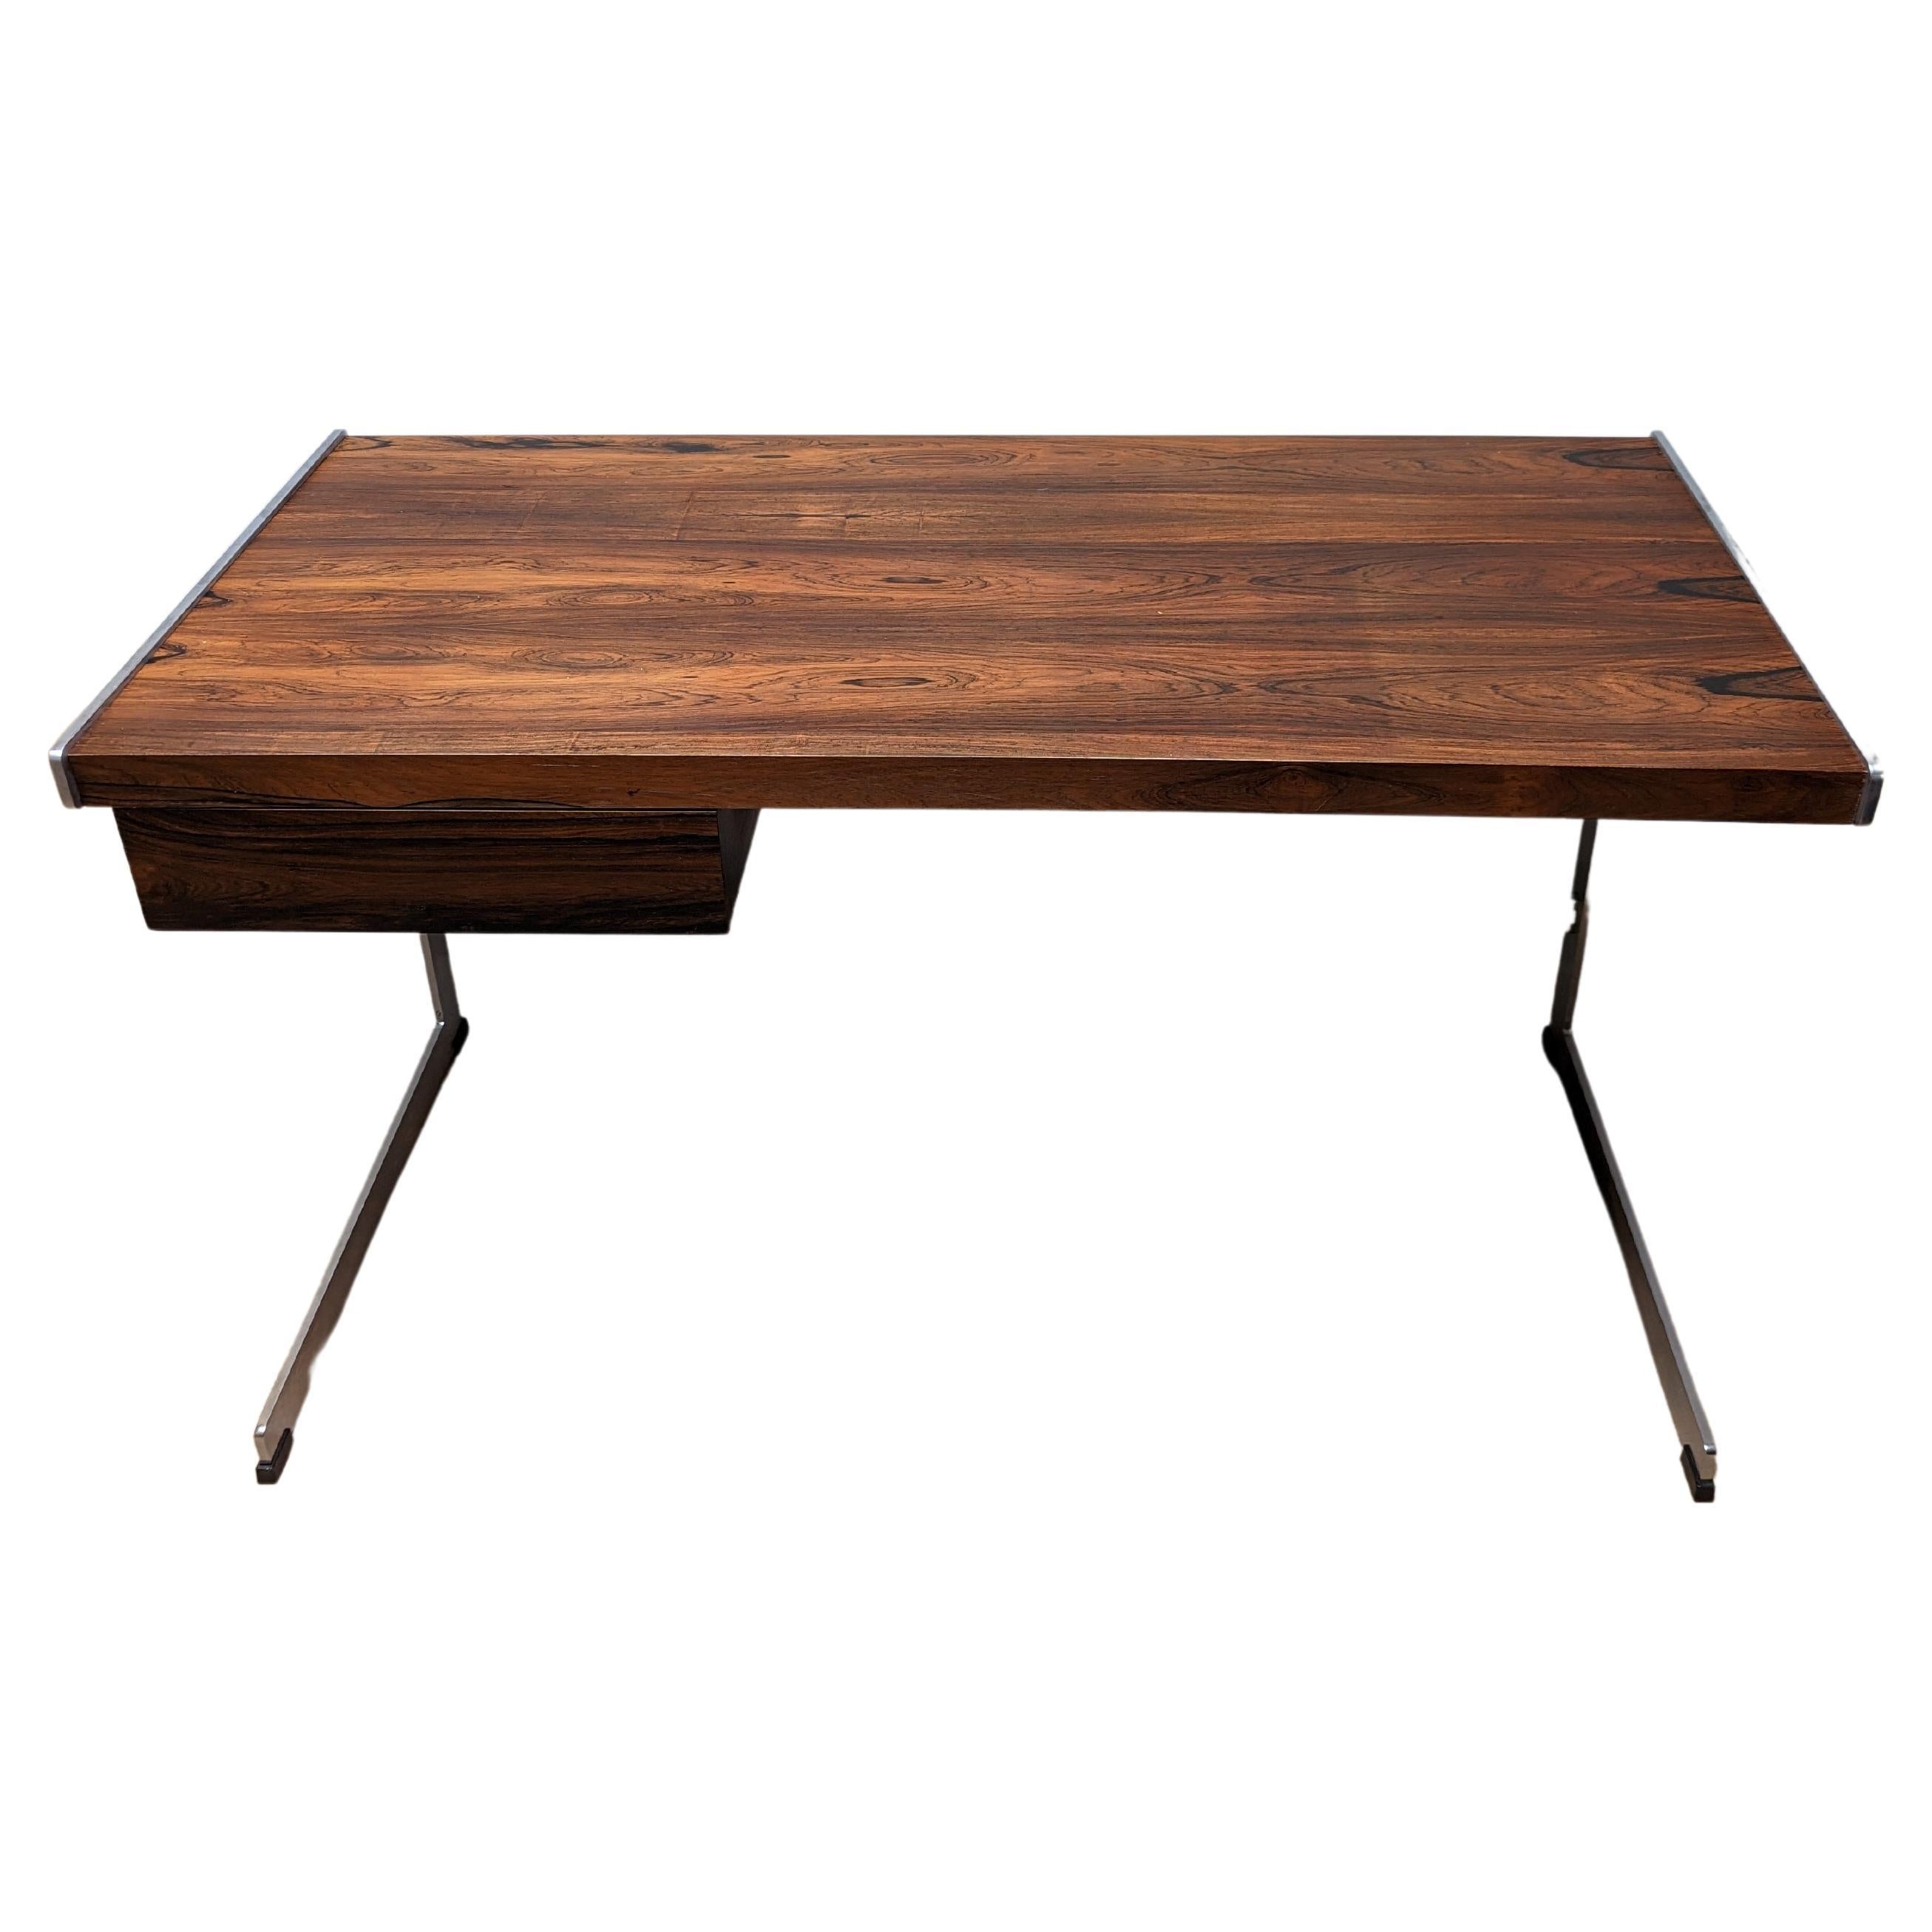 Stunning Richard Young for Merrow Associates Desk, Rosewood with Chrome Legs